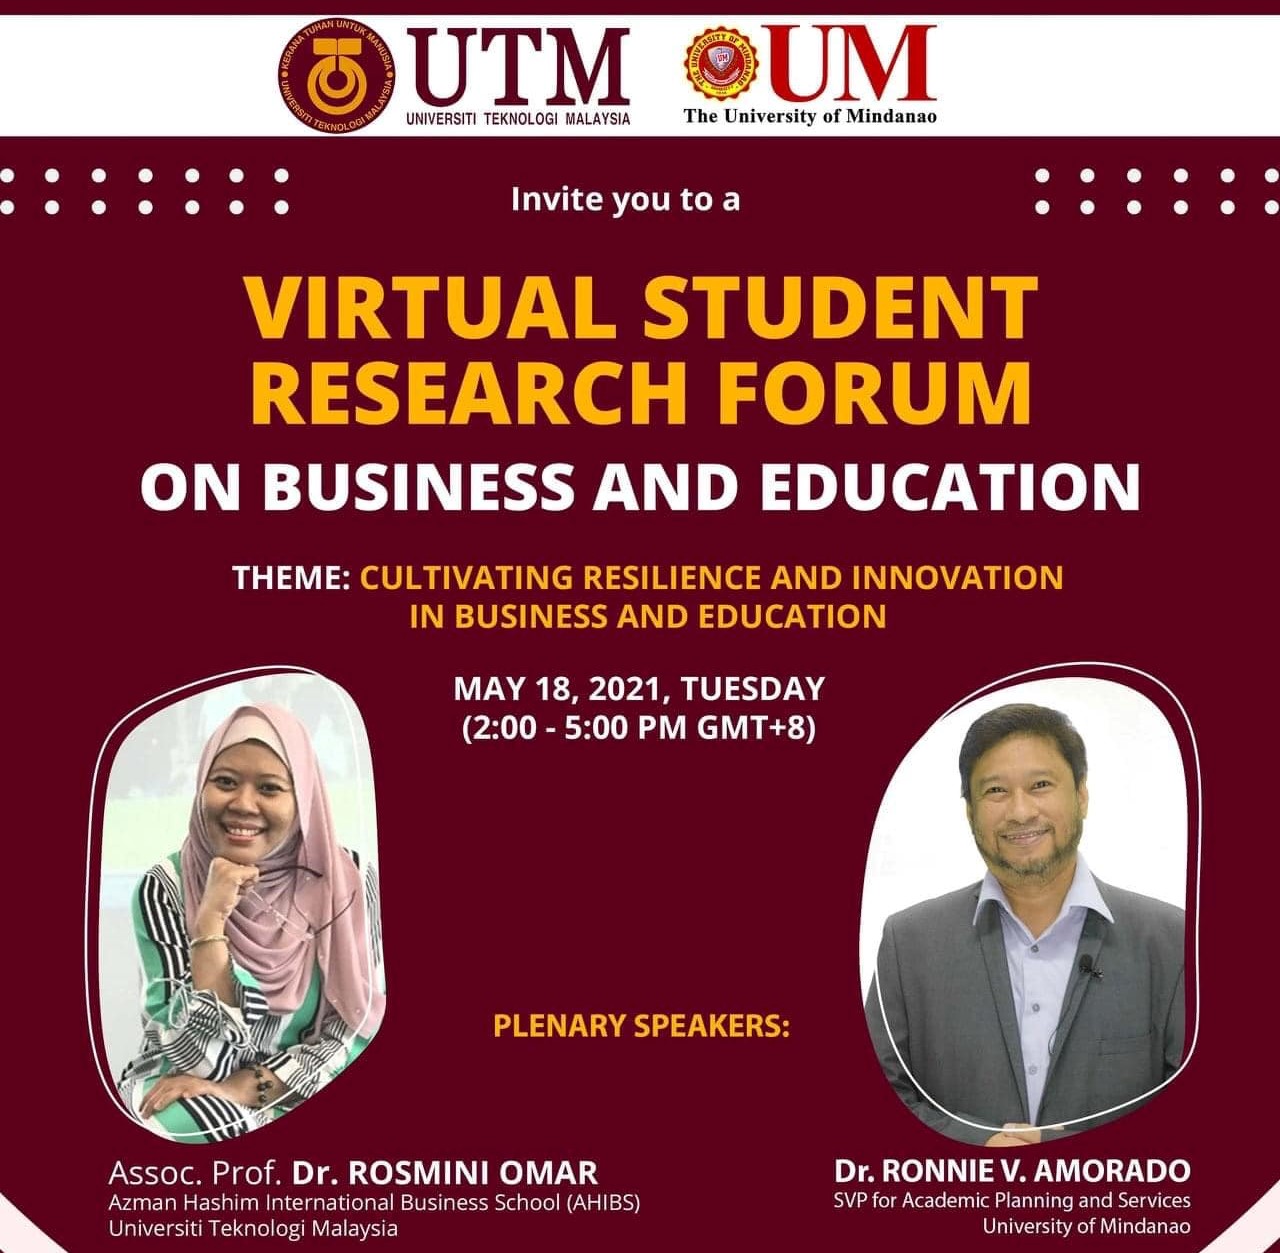 "Cultivating Resilience and Innovation in Business and Education" forum on May 18